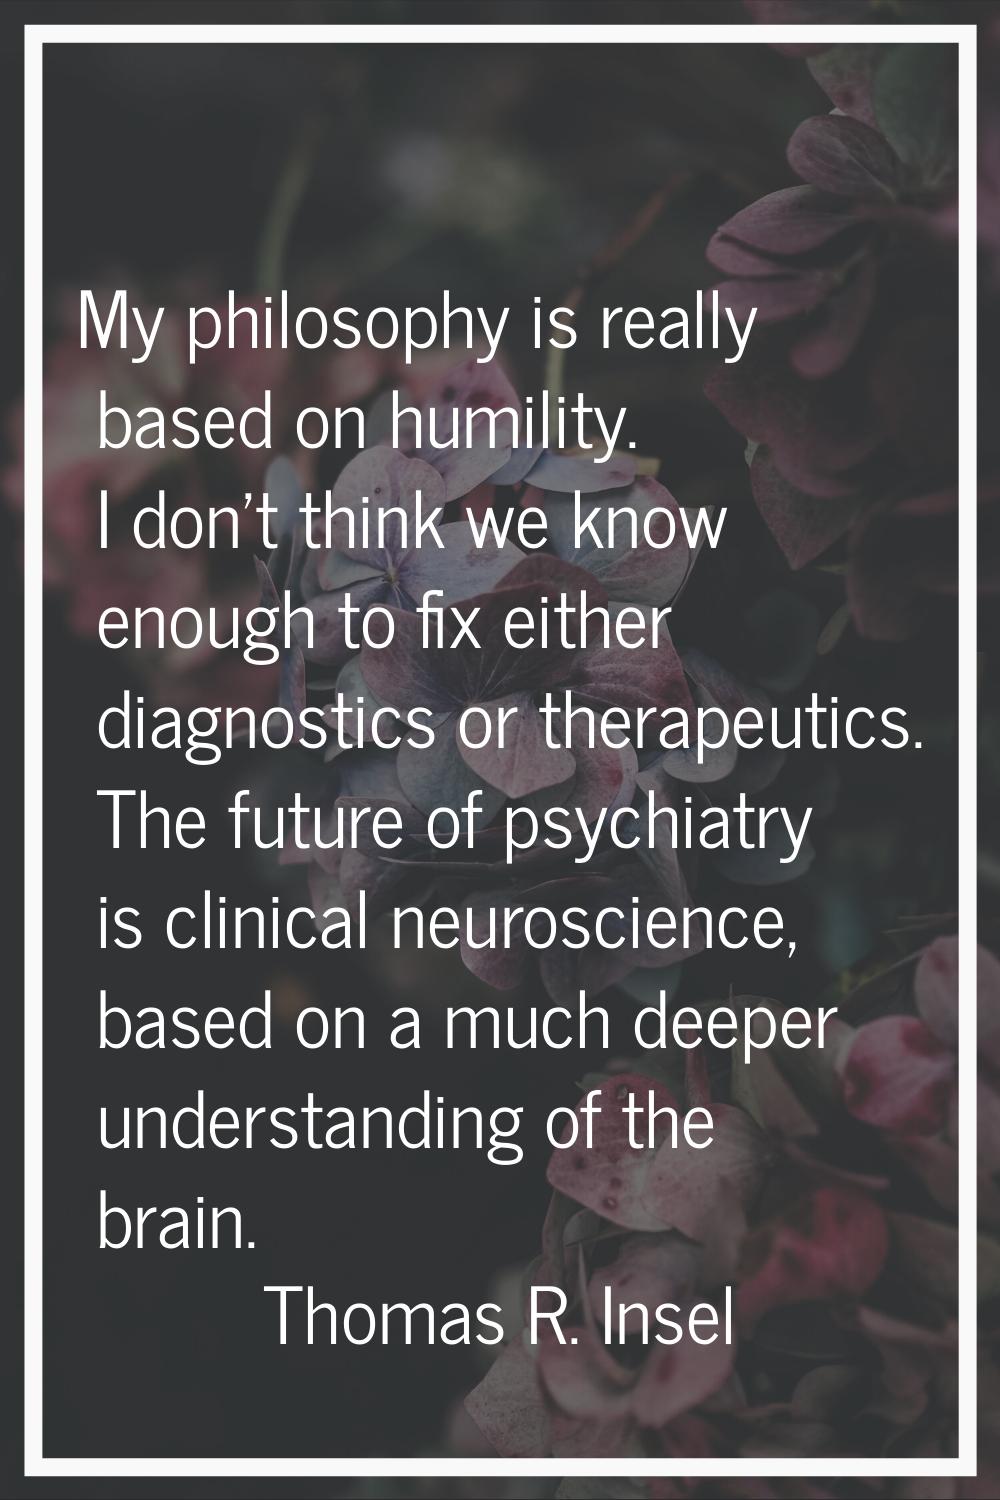 My philosophy is really based on humility. I don't think we know enough to fix either diagnostics o